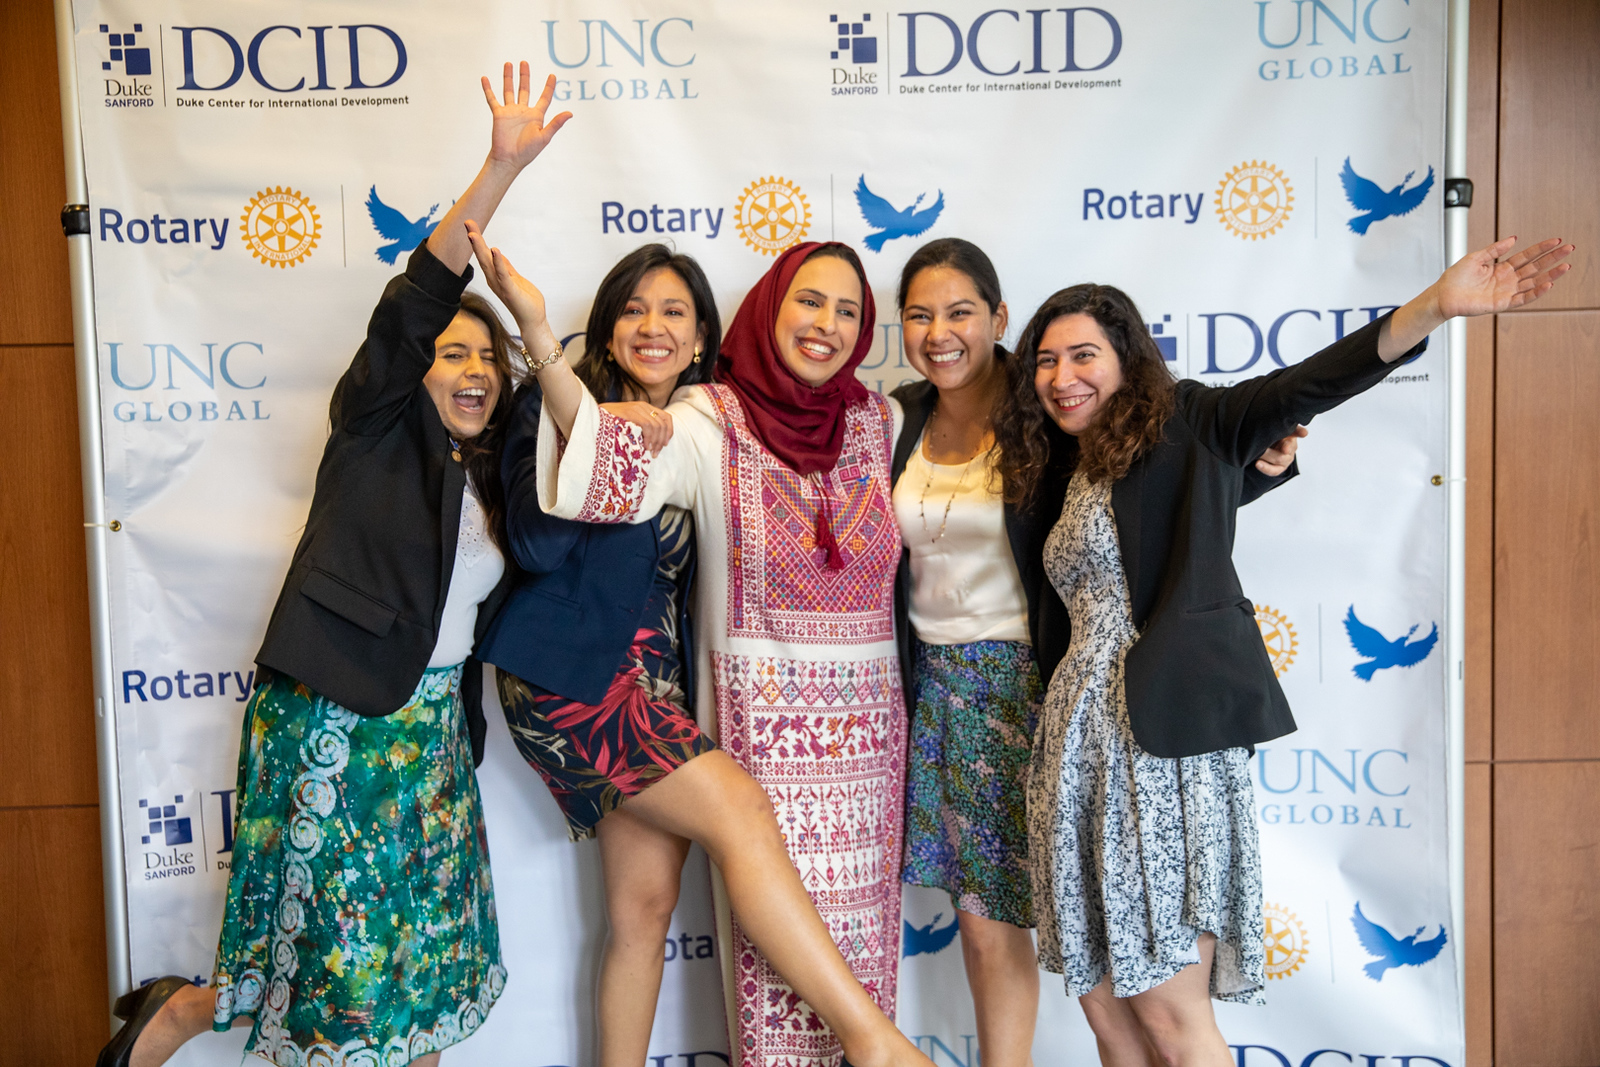 Five smiling women in front of a banner with the UNC Global, Rotary and Duke Center for International Development logos.